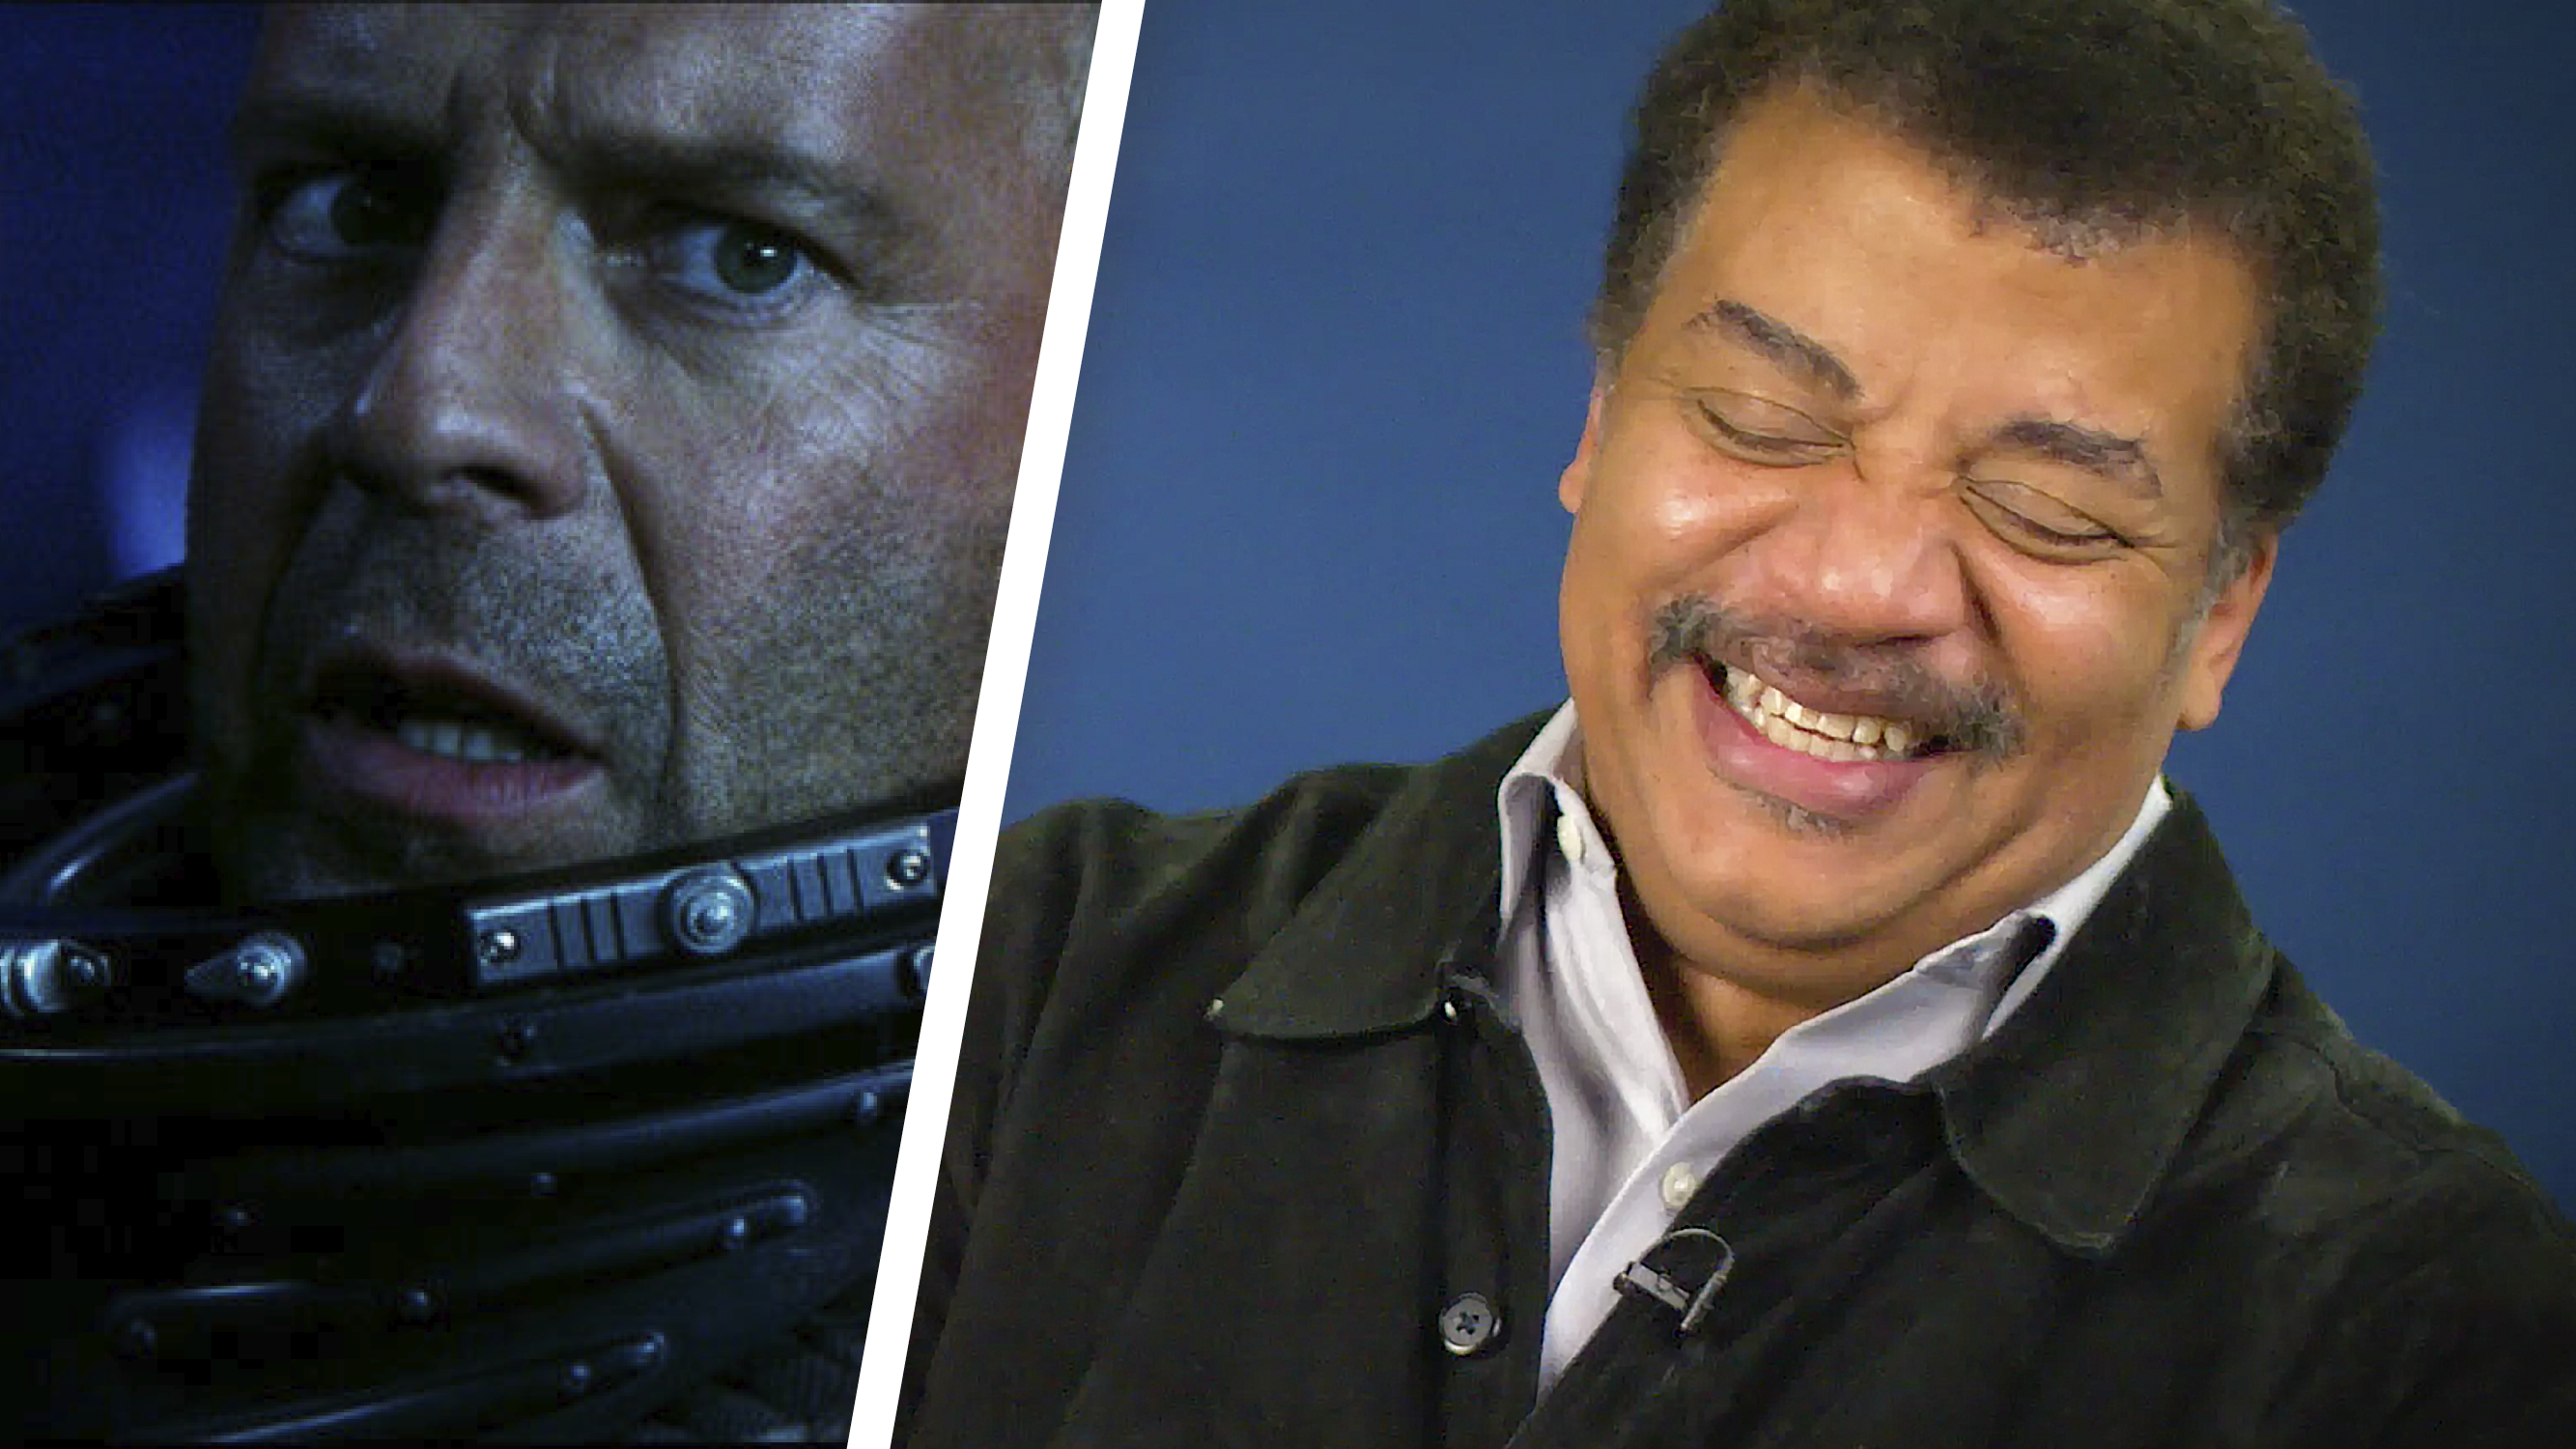 /content/dam/prh/articles/adults/2019/november/neil-degrasse-tyson-article-card.png